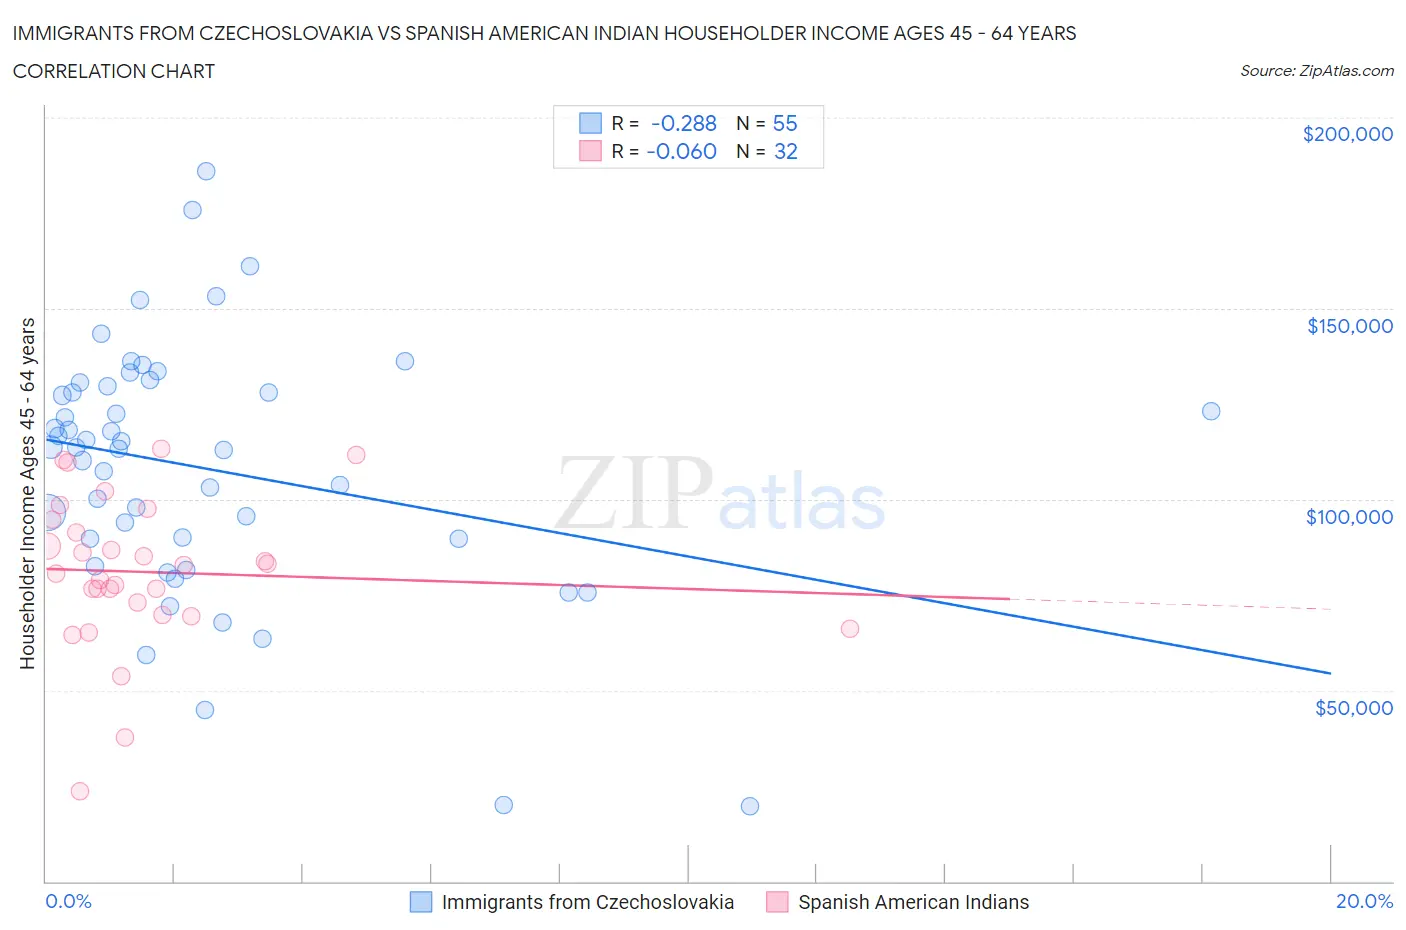 Immigrants from Czechoslovakia vs Spanish American Indian Householder Income Ages 45 - 64 years